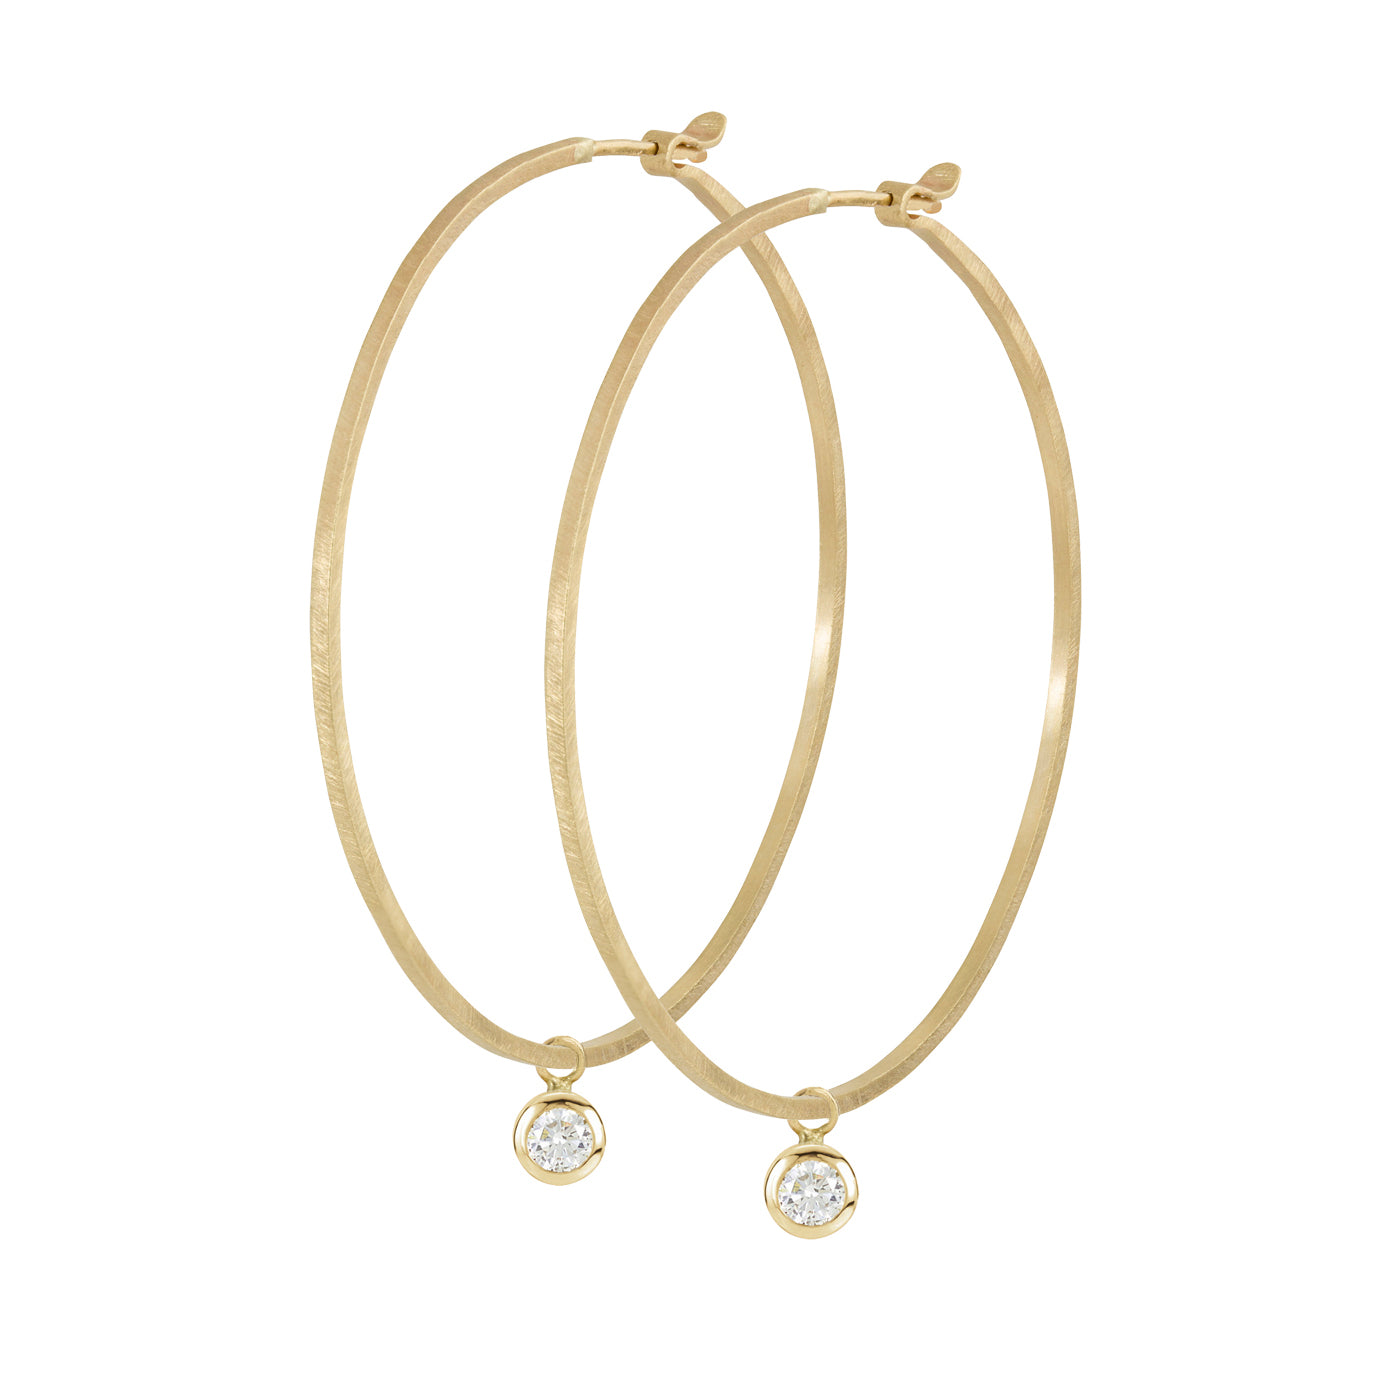 14k gold OTTO diamond hoop charms on ORMS hoops